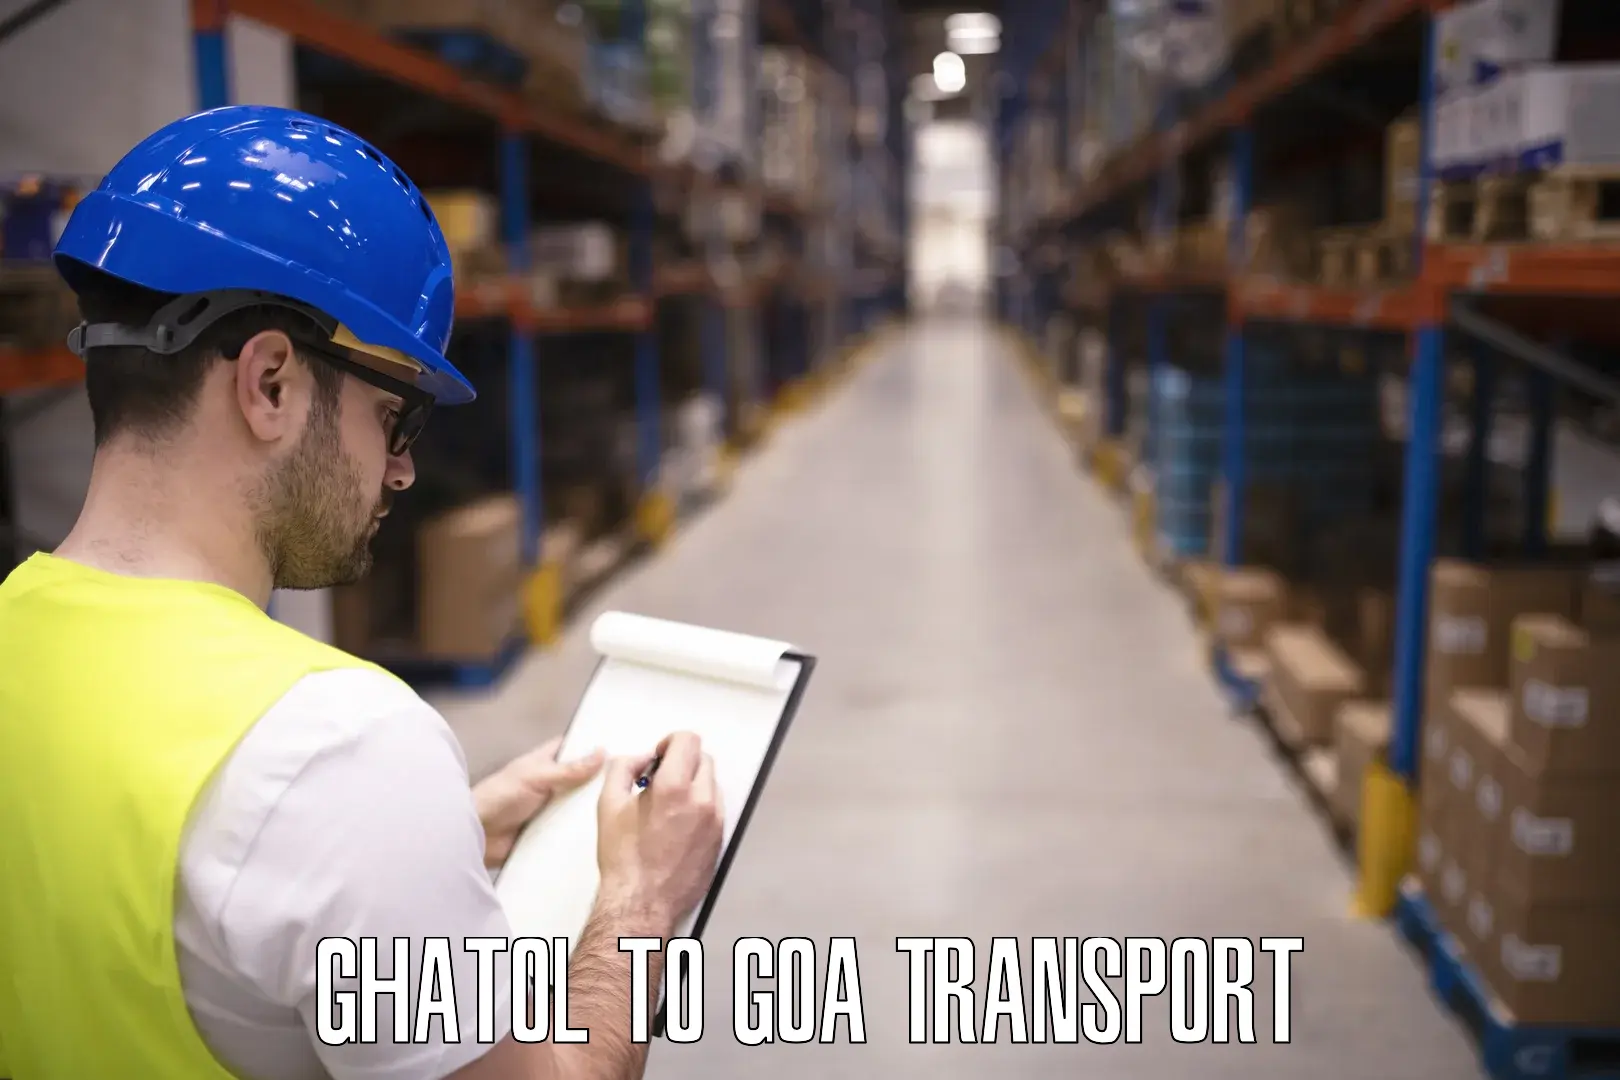 Nationwide transport services Ghatol to South Goa